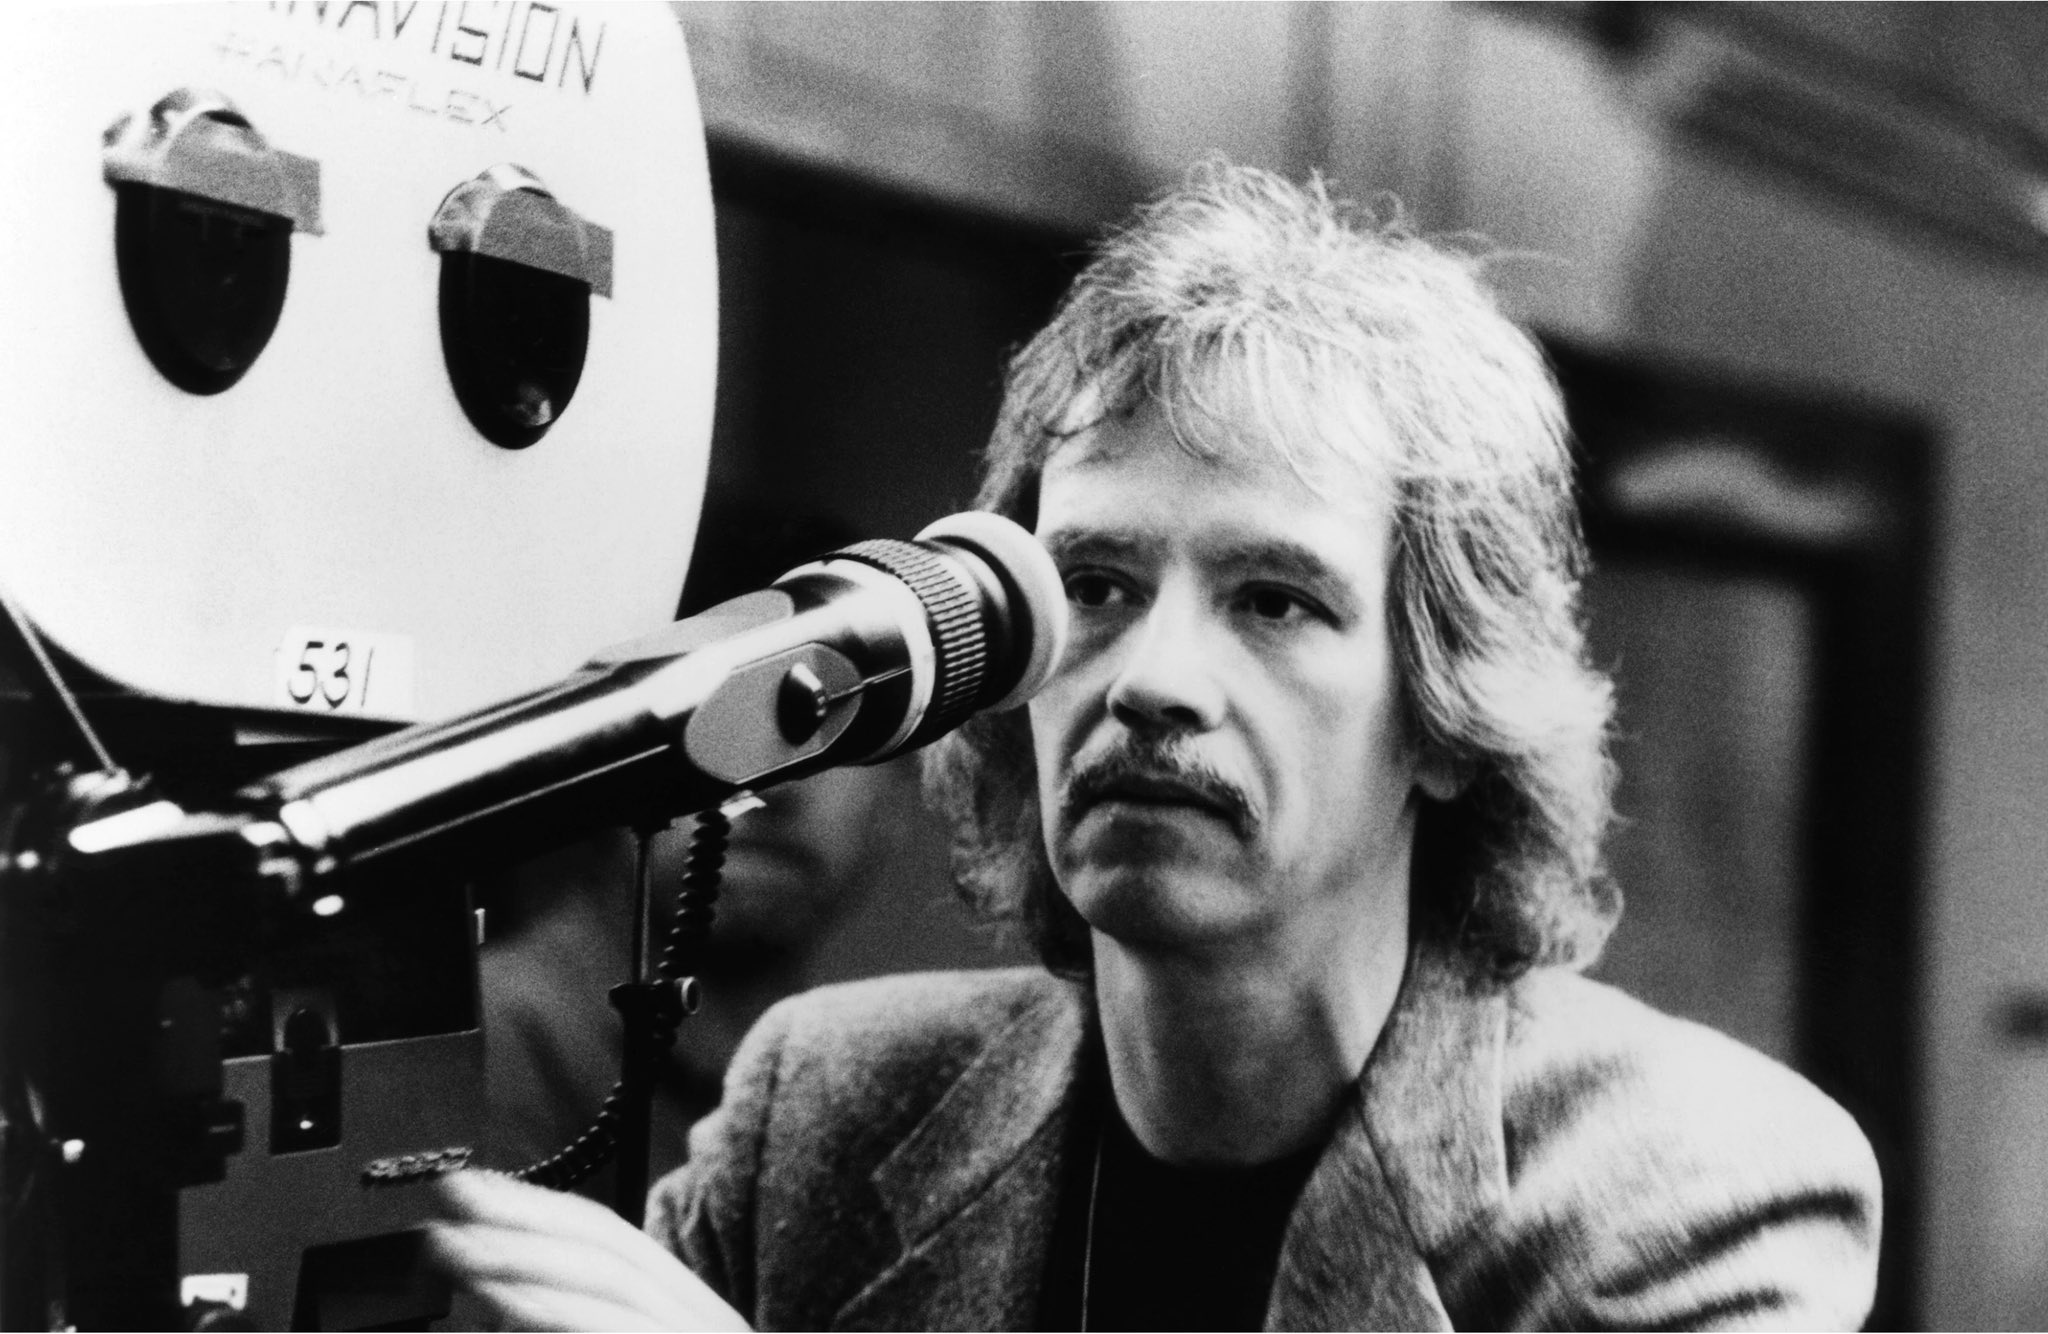 Happy 75th Birthday to one of my great movie making influences, the legendary John Carpenter. 